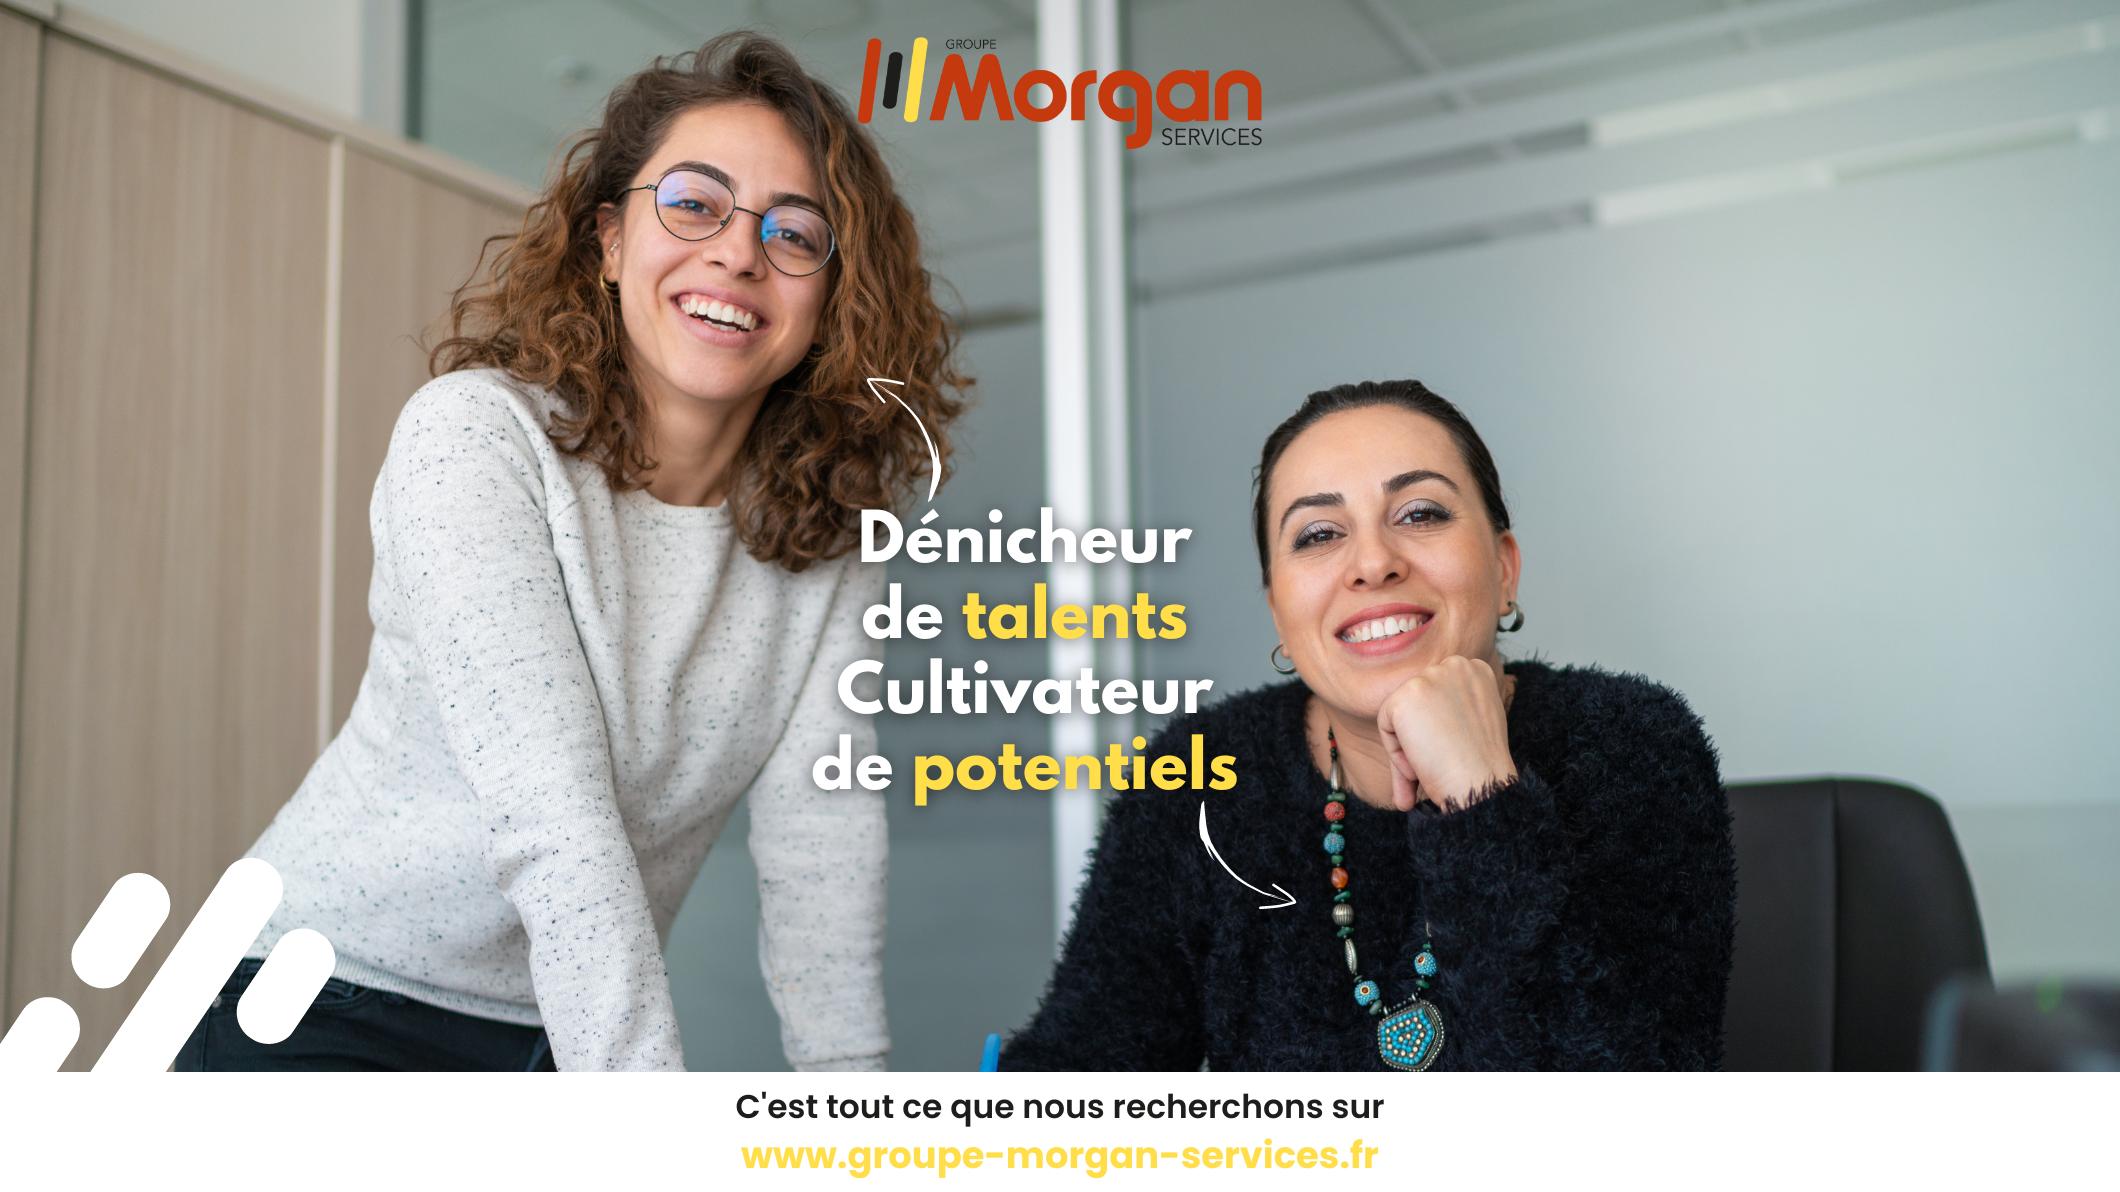 Groupe Morgan Services Angers (doutre) Angers